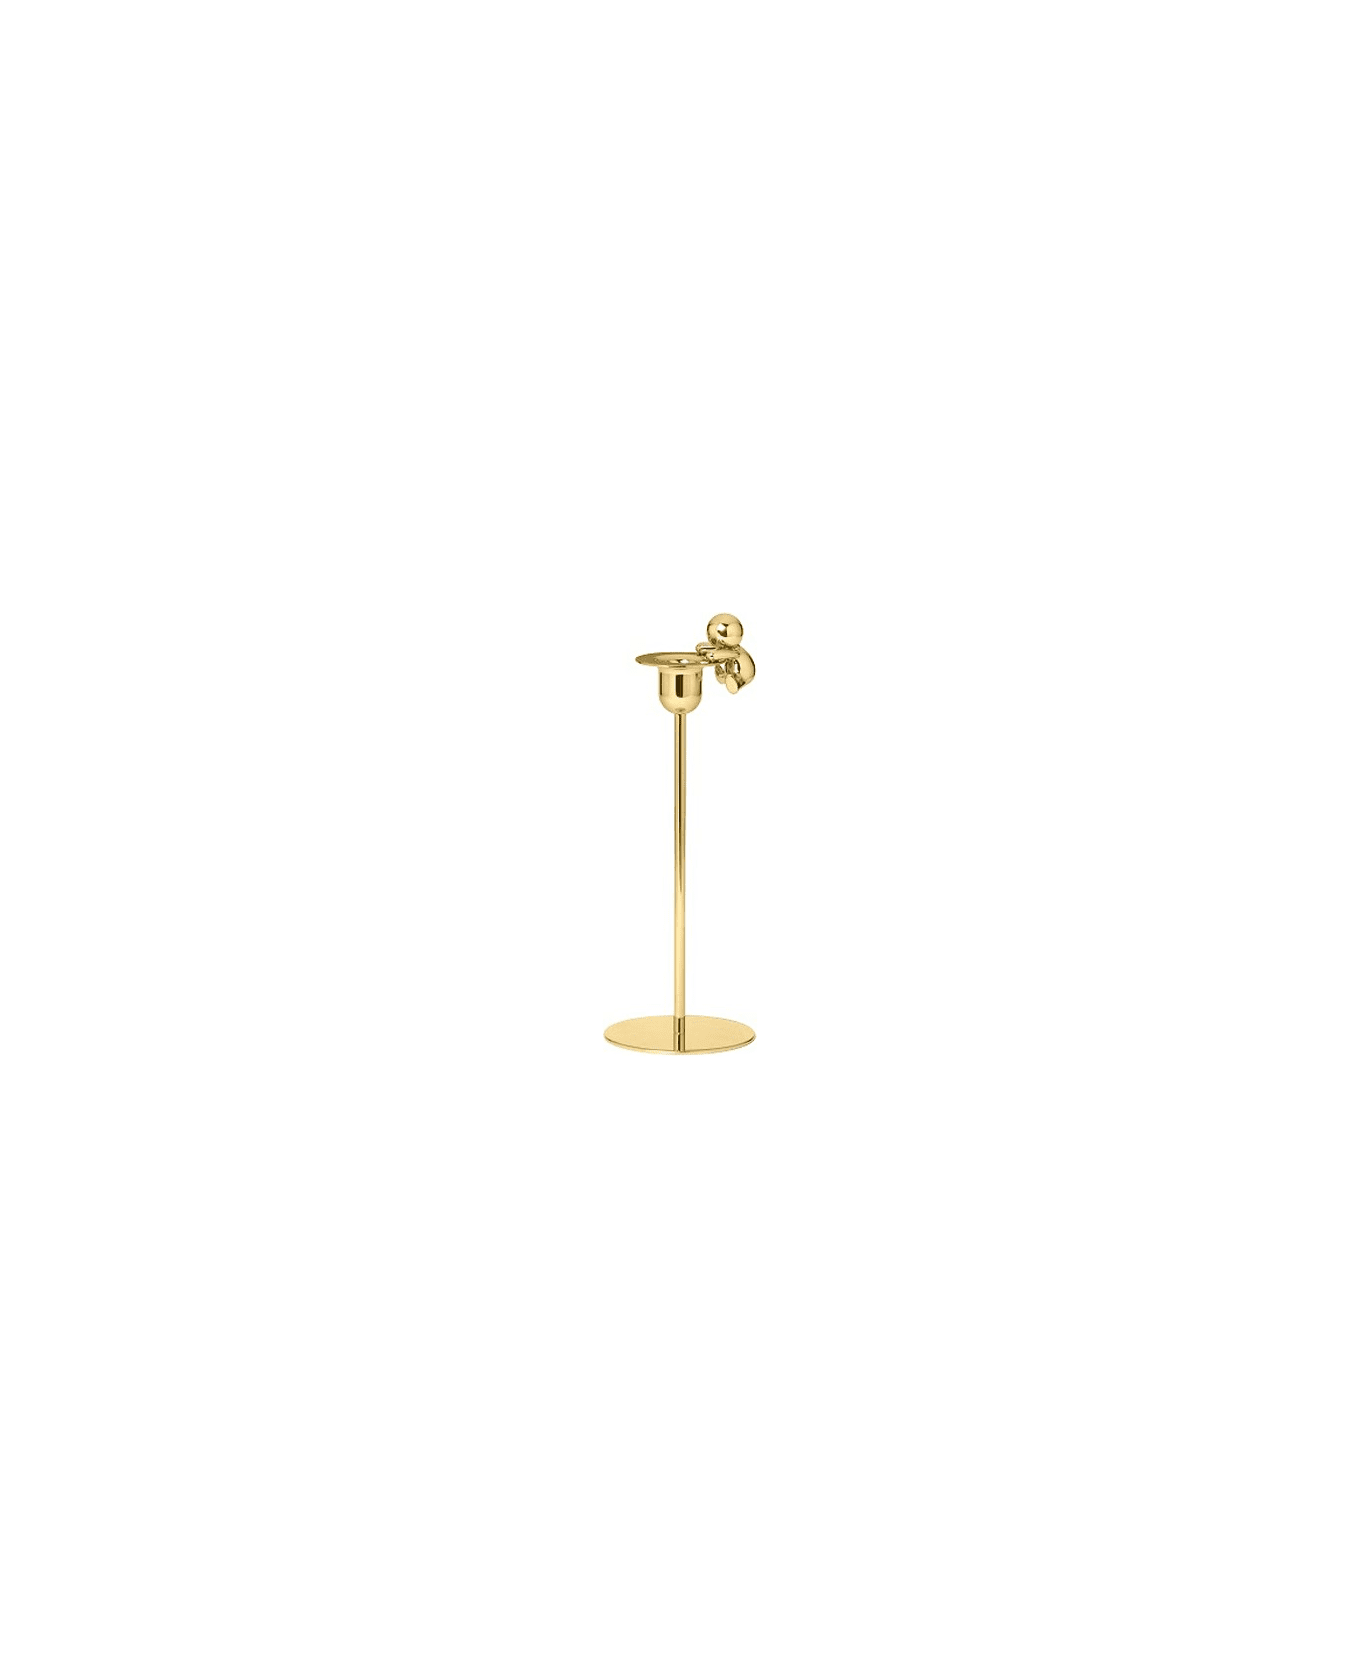 Ghidini 1961 Omini - The Climber Tall Candlestick Polished Brass - Polished brass